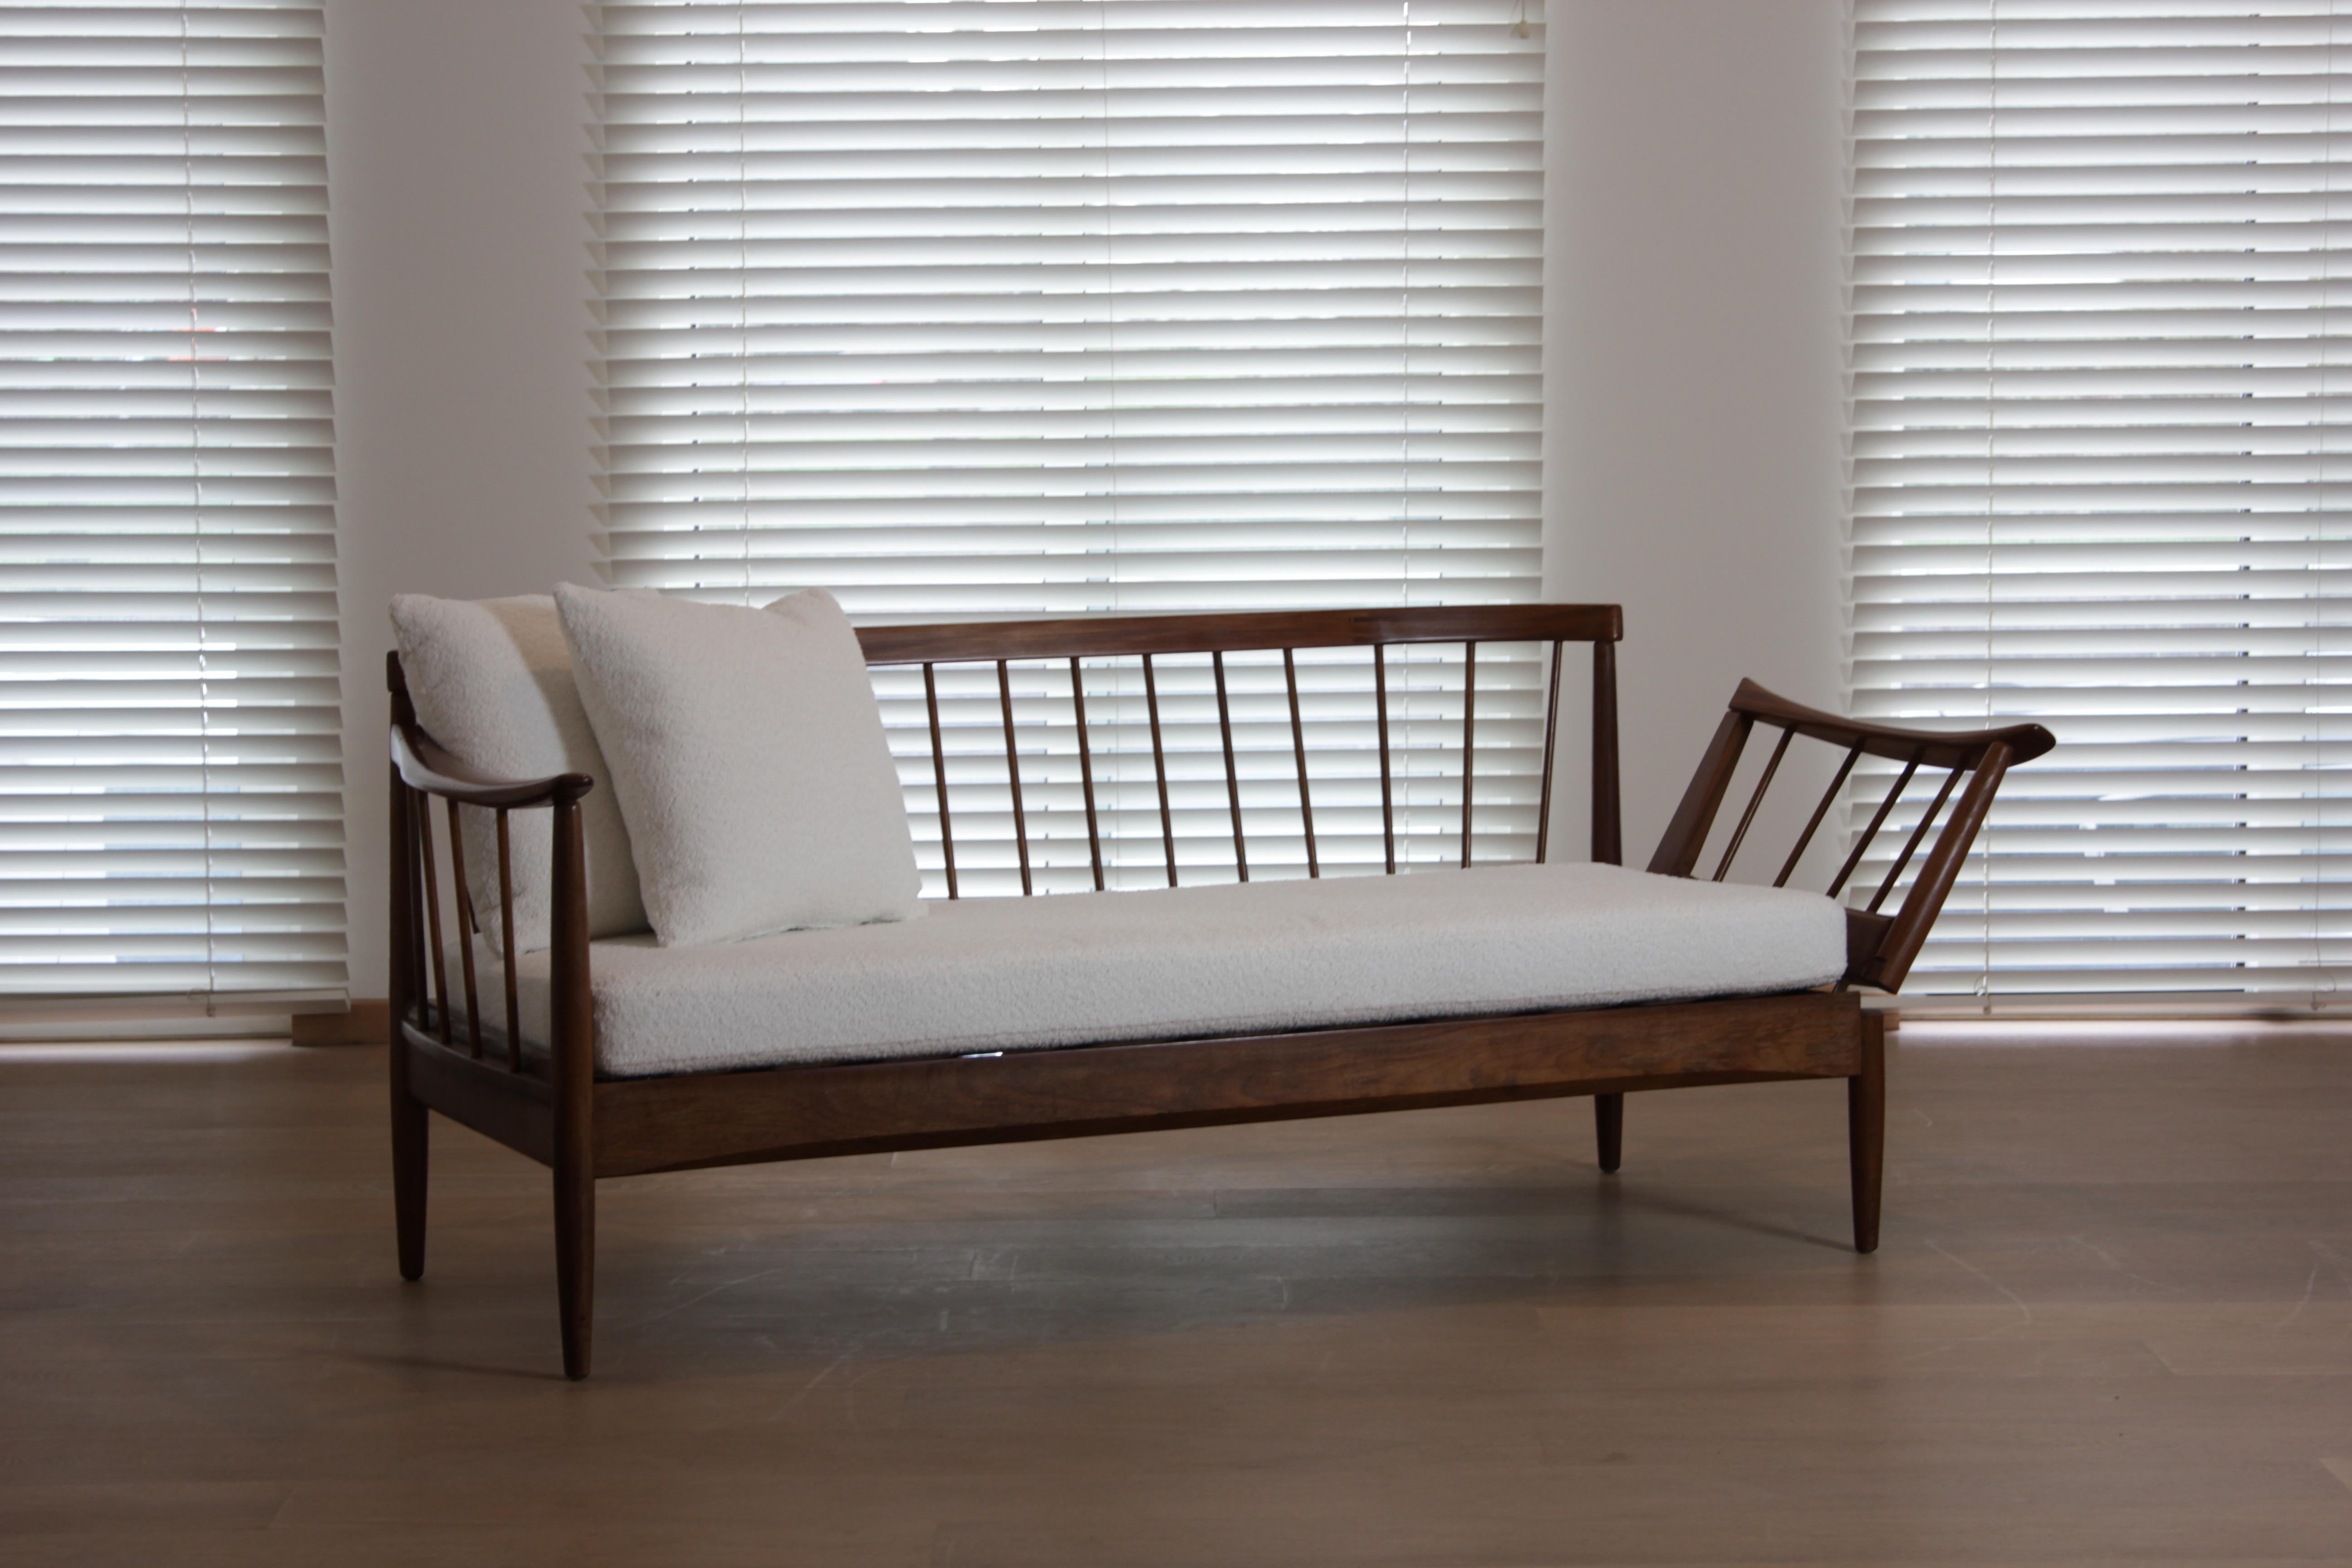 Mid 20th Century Modern Daybed by Greaves & Thomas, 1960s For Sale 6